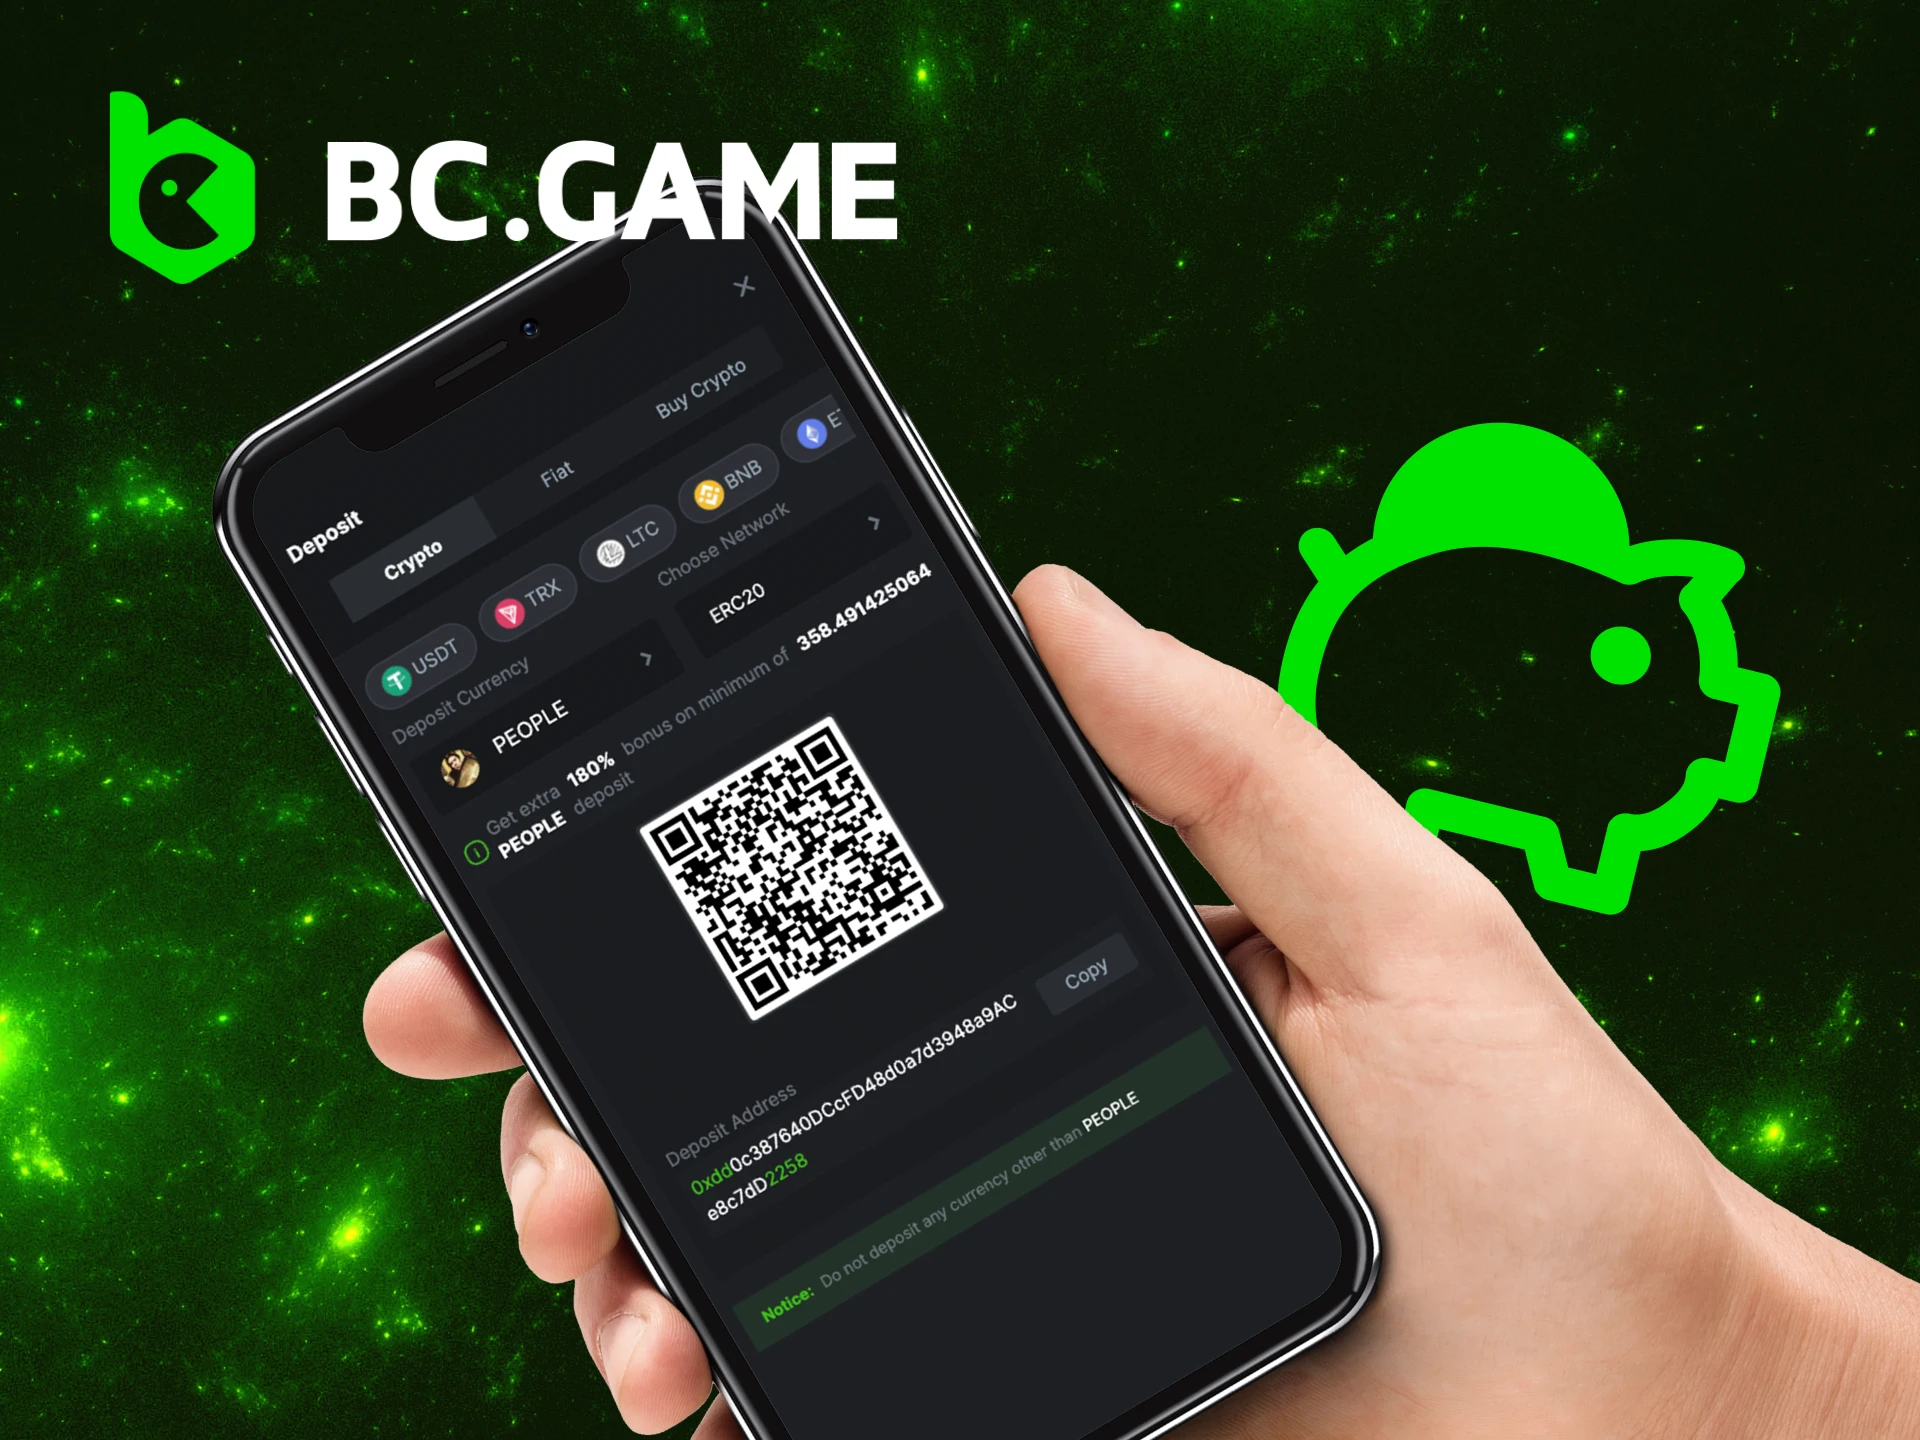 Instructions on how to make a deposit in the BC Game application.